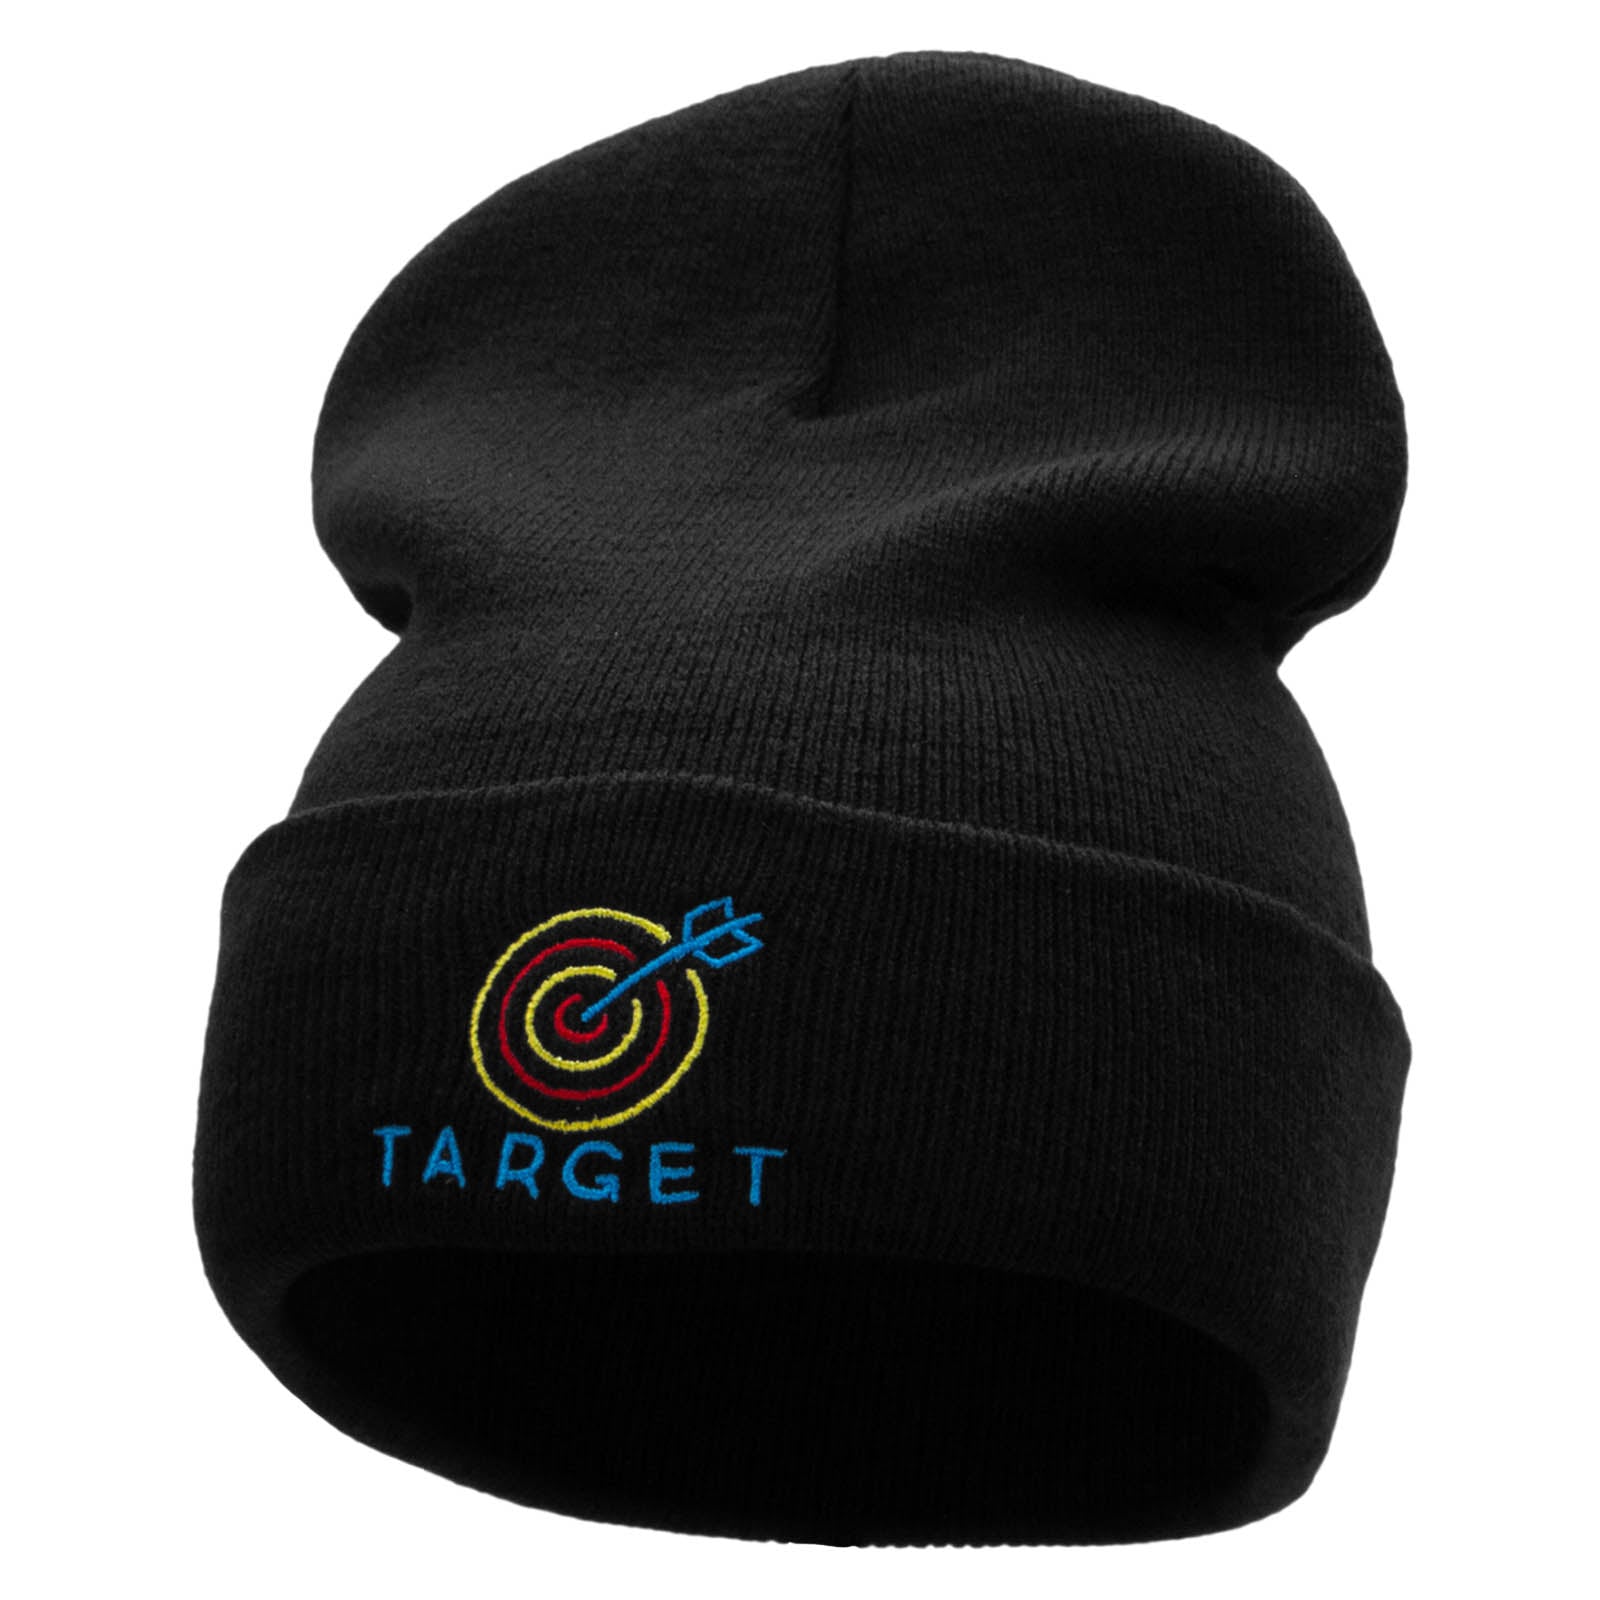 Neon Target Embroidered 12 Inch Long Knitted Beanie - Black OSFM